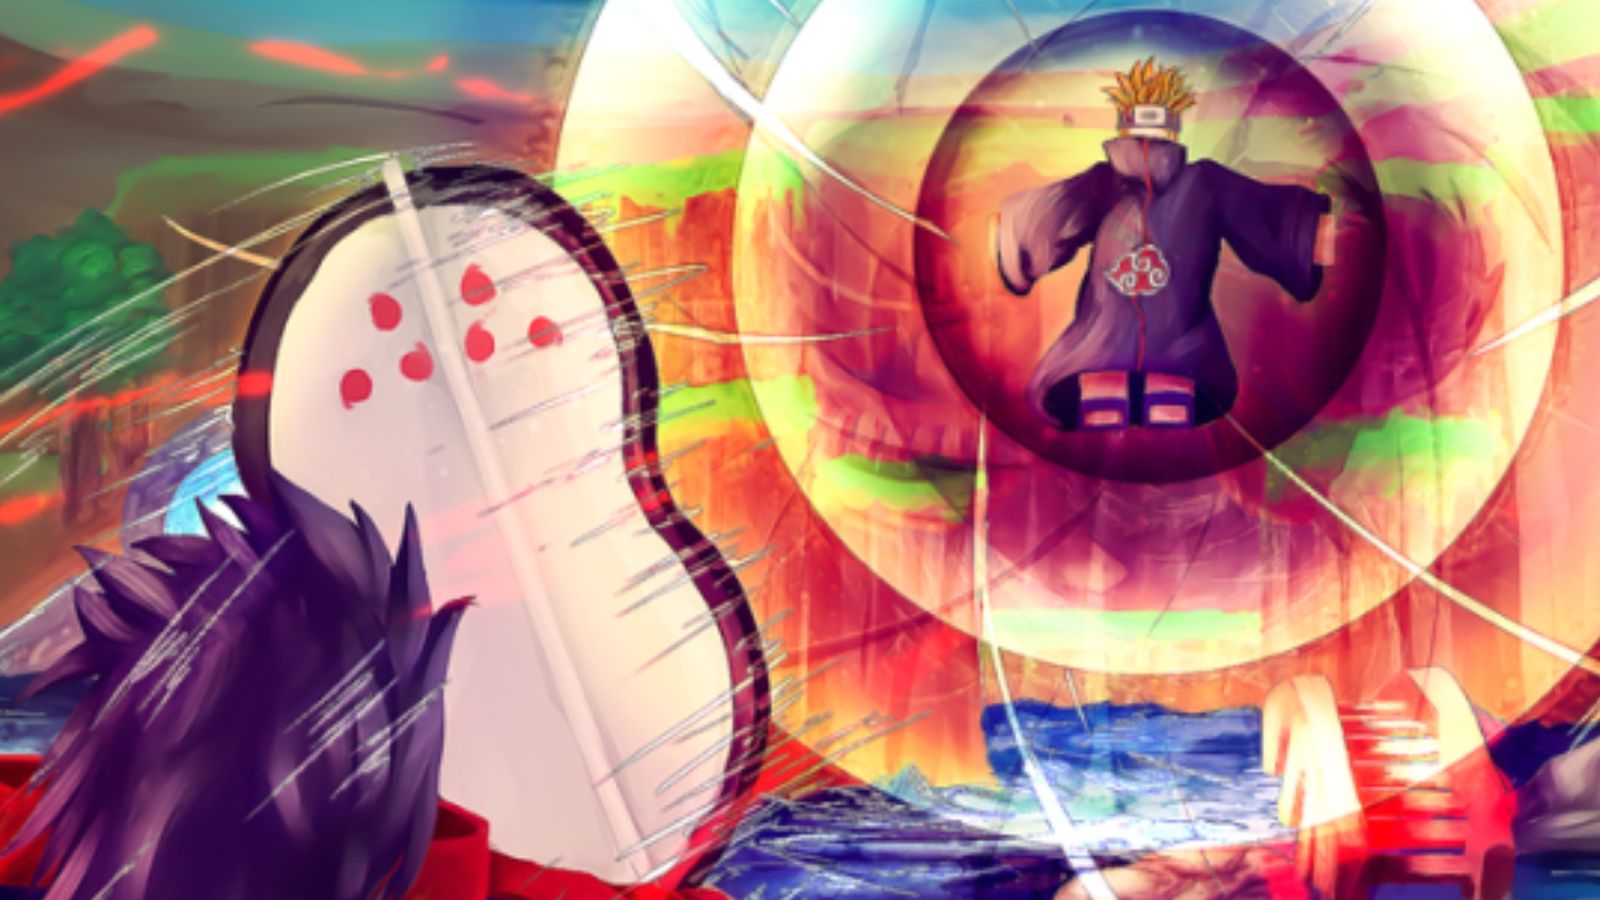 Screenshot from Anime Worlds Simulator, showing two Roblox avatars preparing for battle